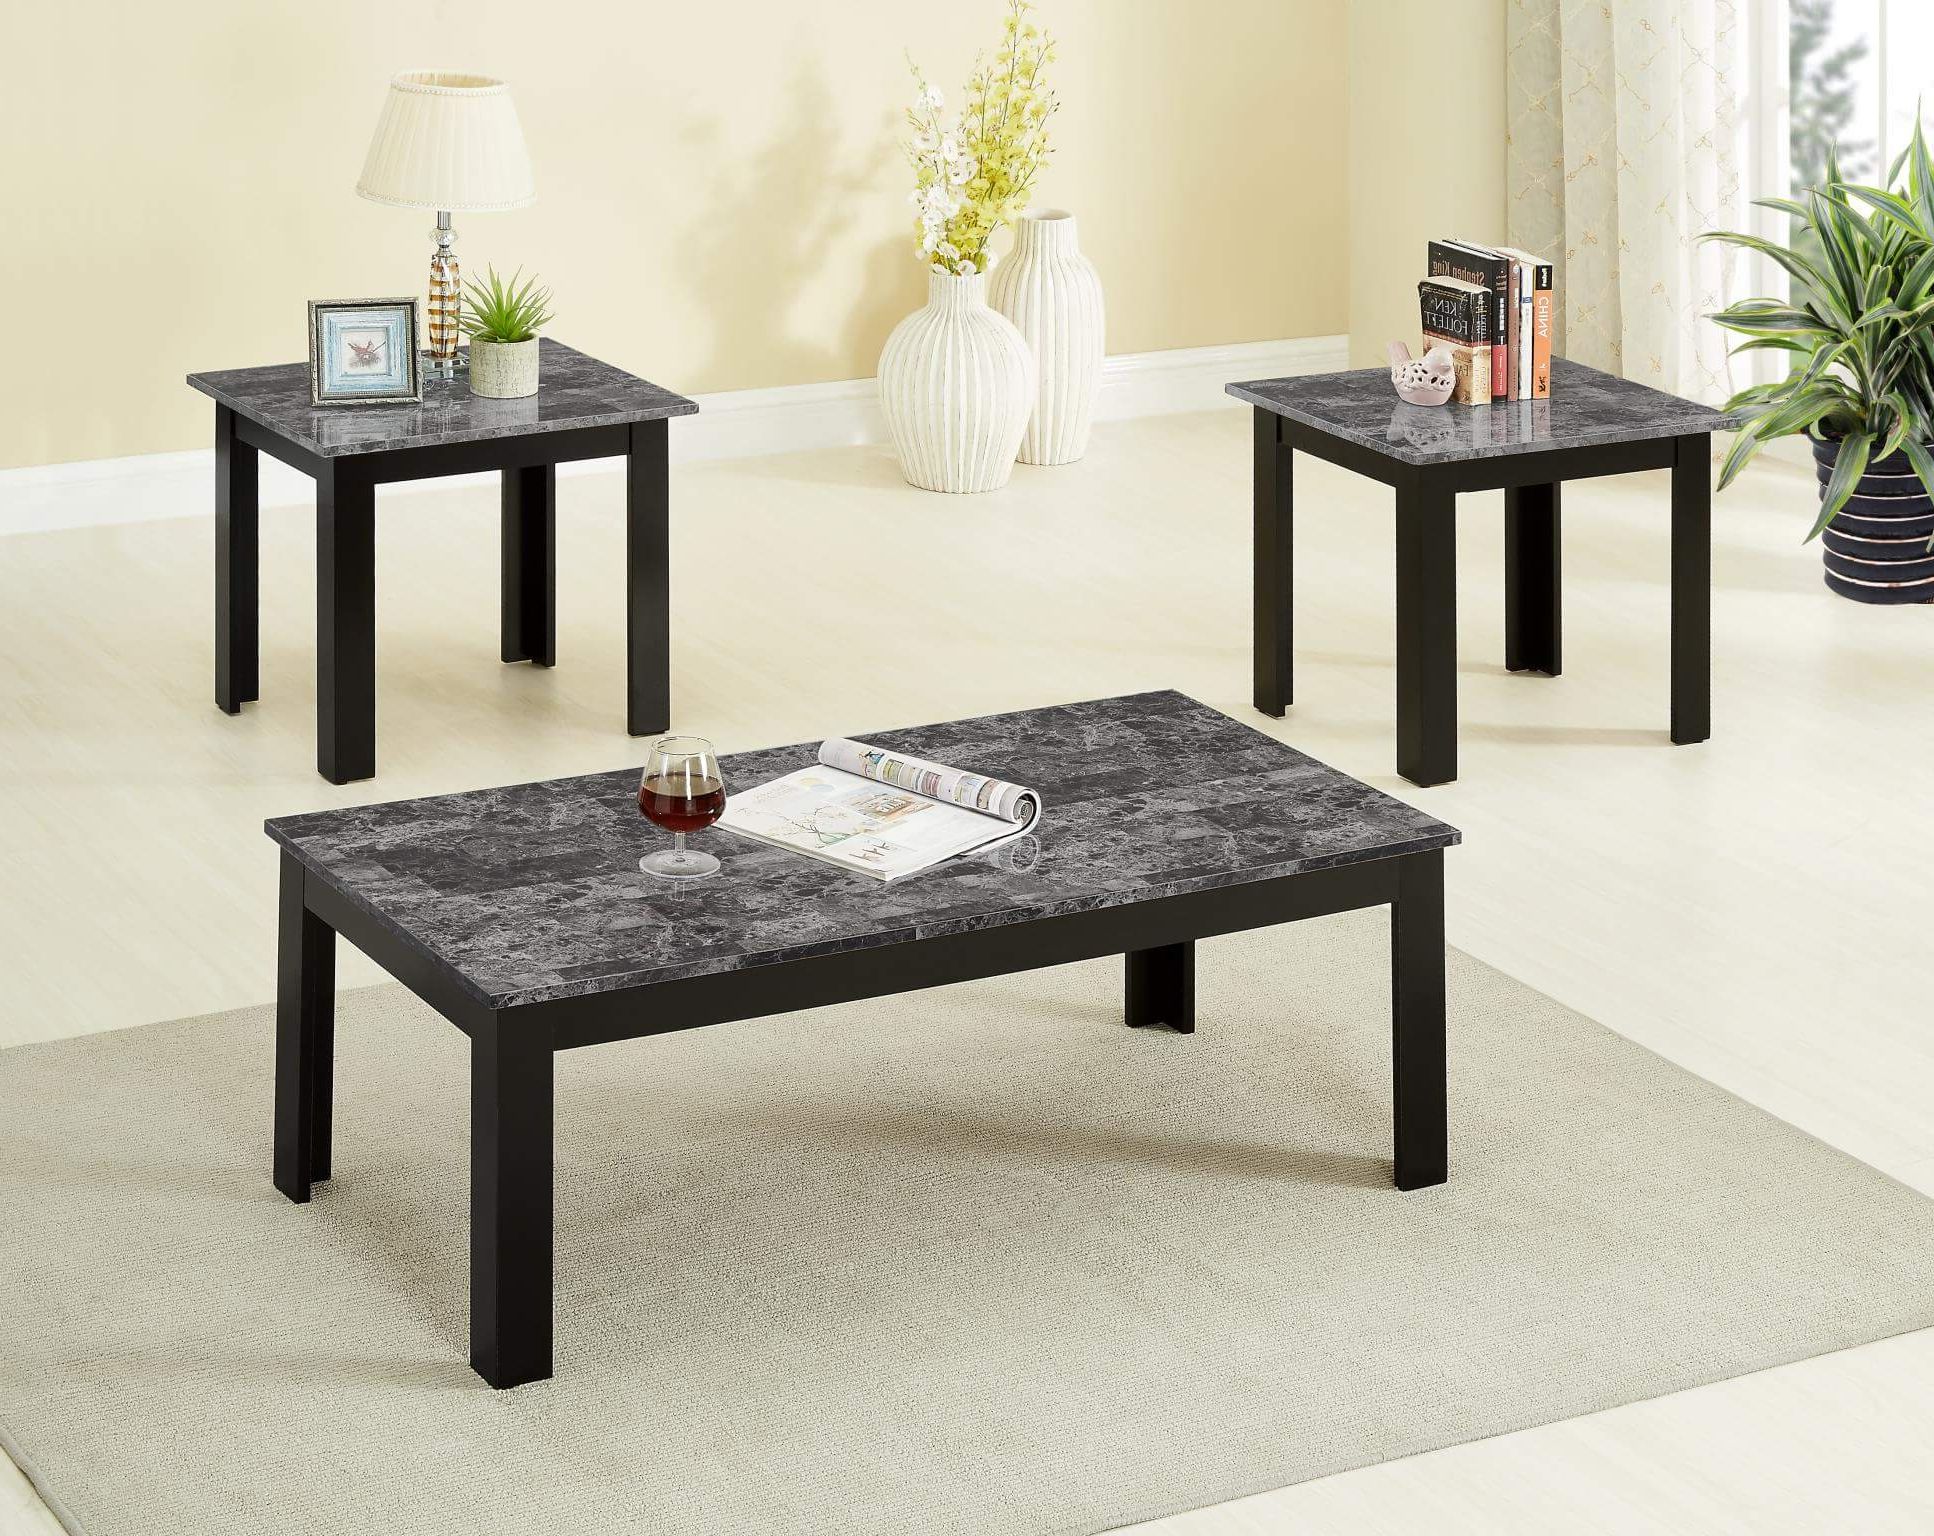 3 Piece Black Faux Marble Coffee And End Table Set In Well Known Marble Coffee Tables Set Of  (View 12 of 20)